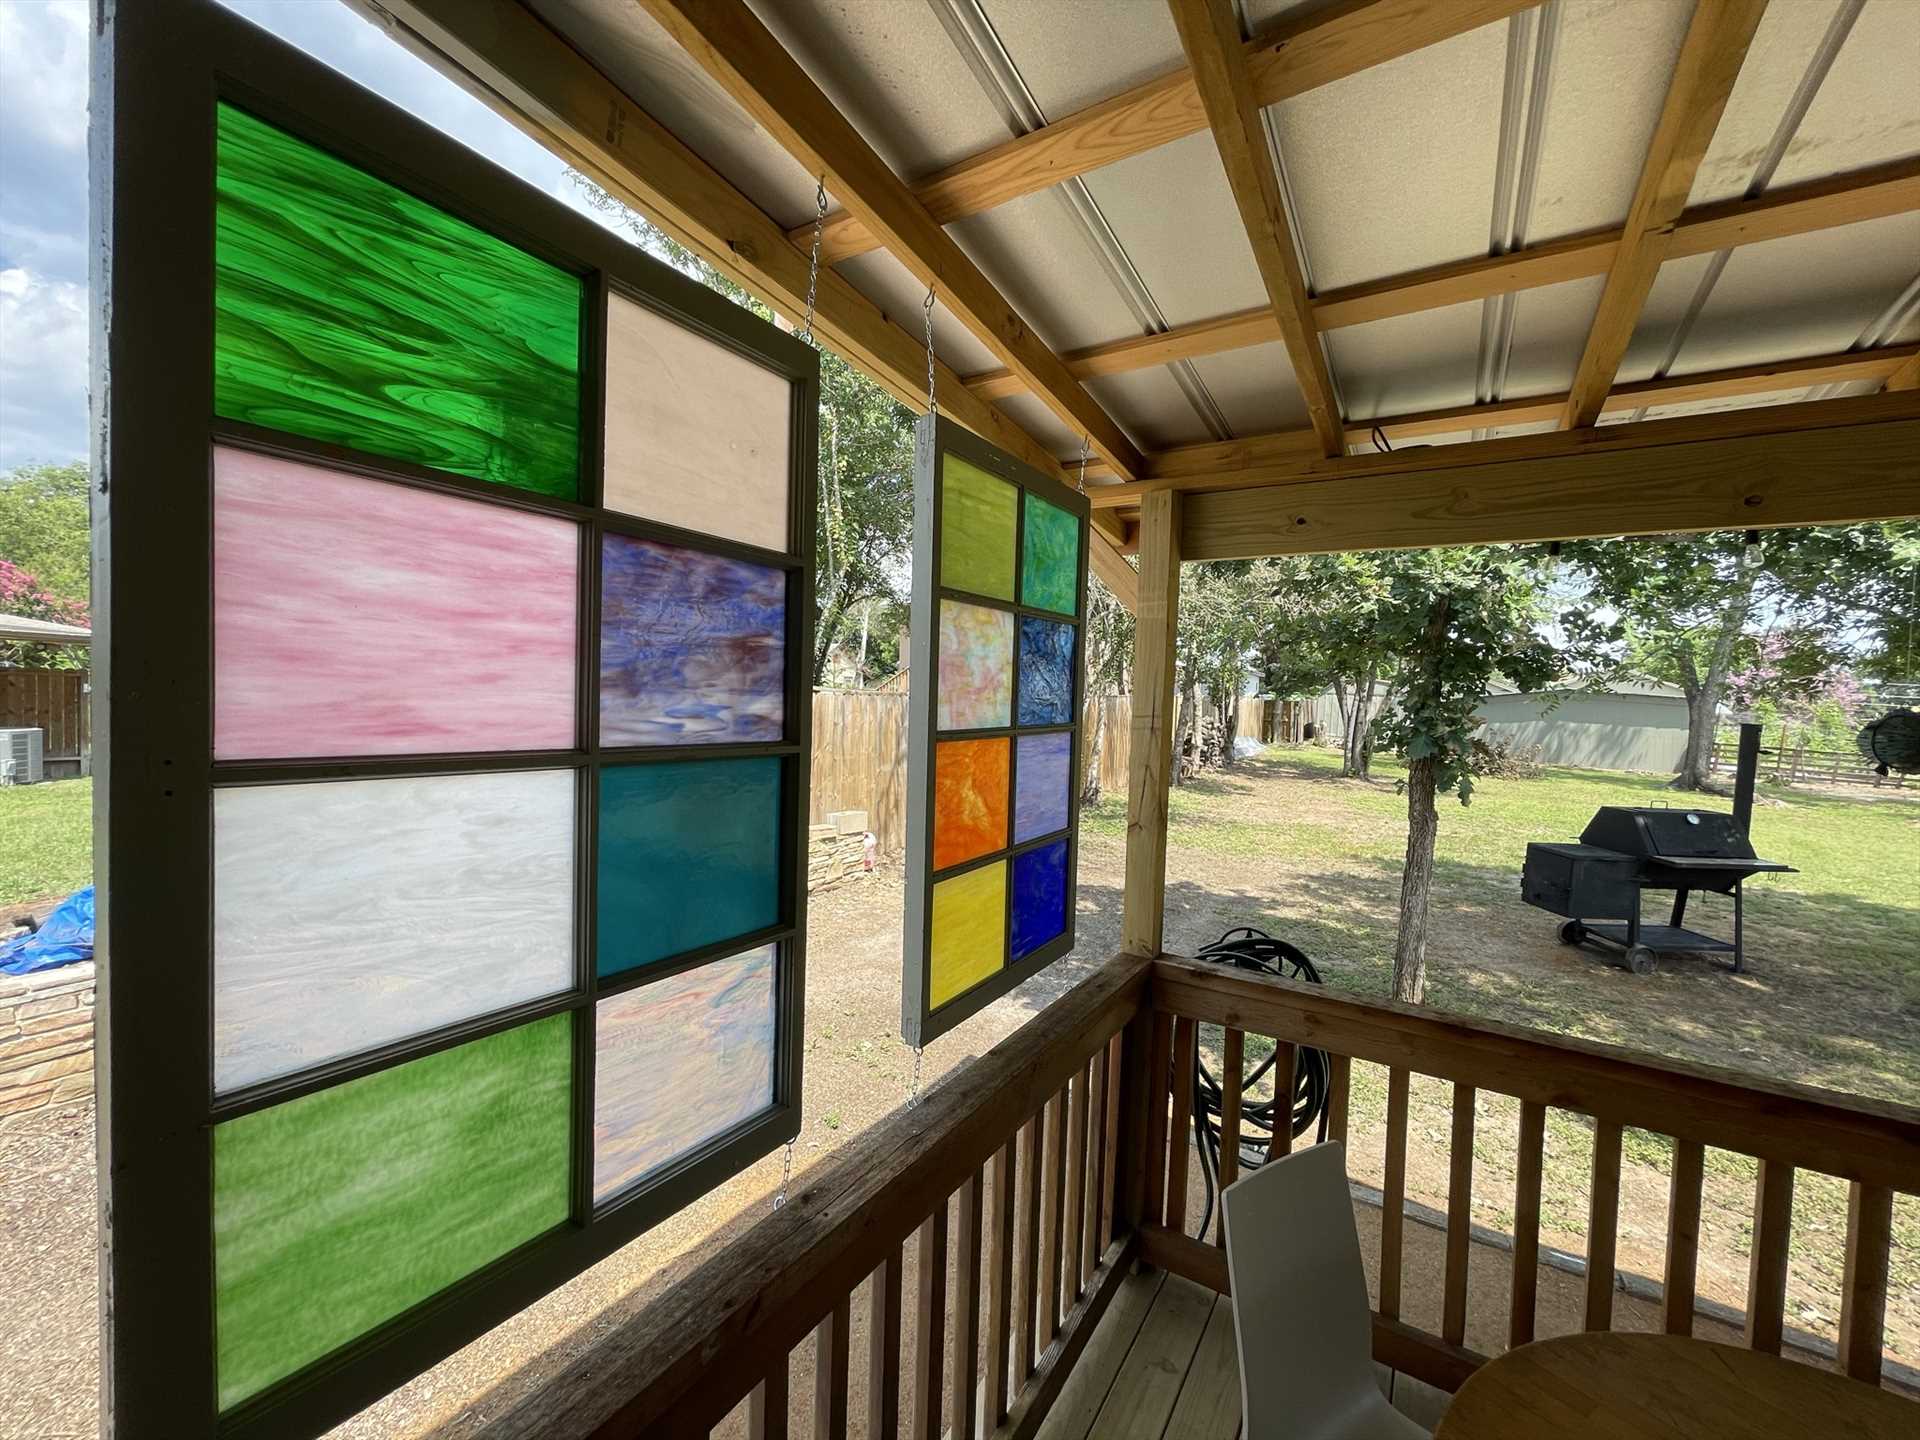                                                 The kids will love the roomy back yard, and you'll love the privacy and brilliant colors the glass panels provide!